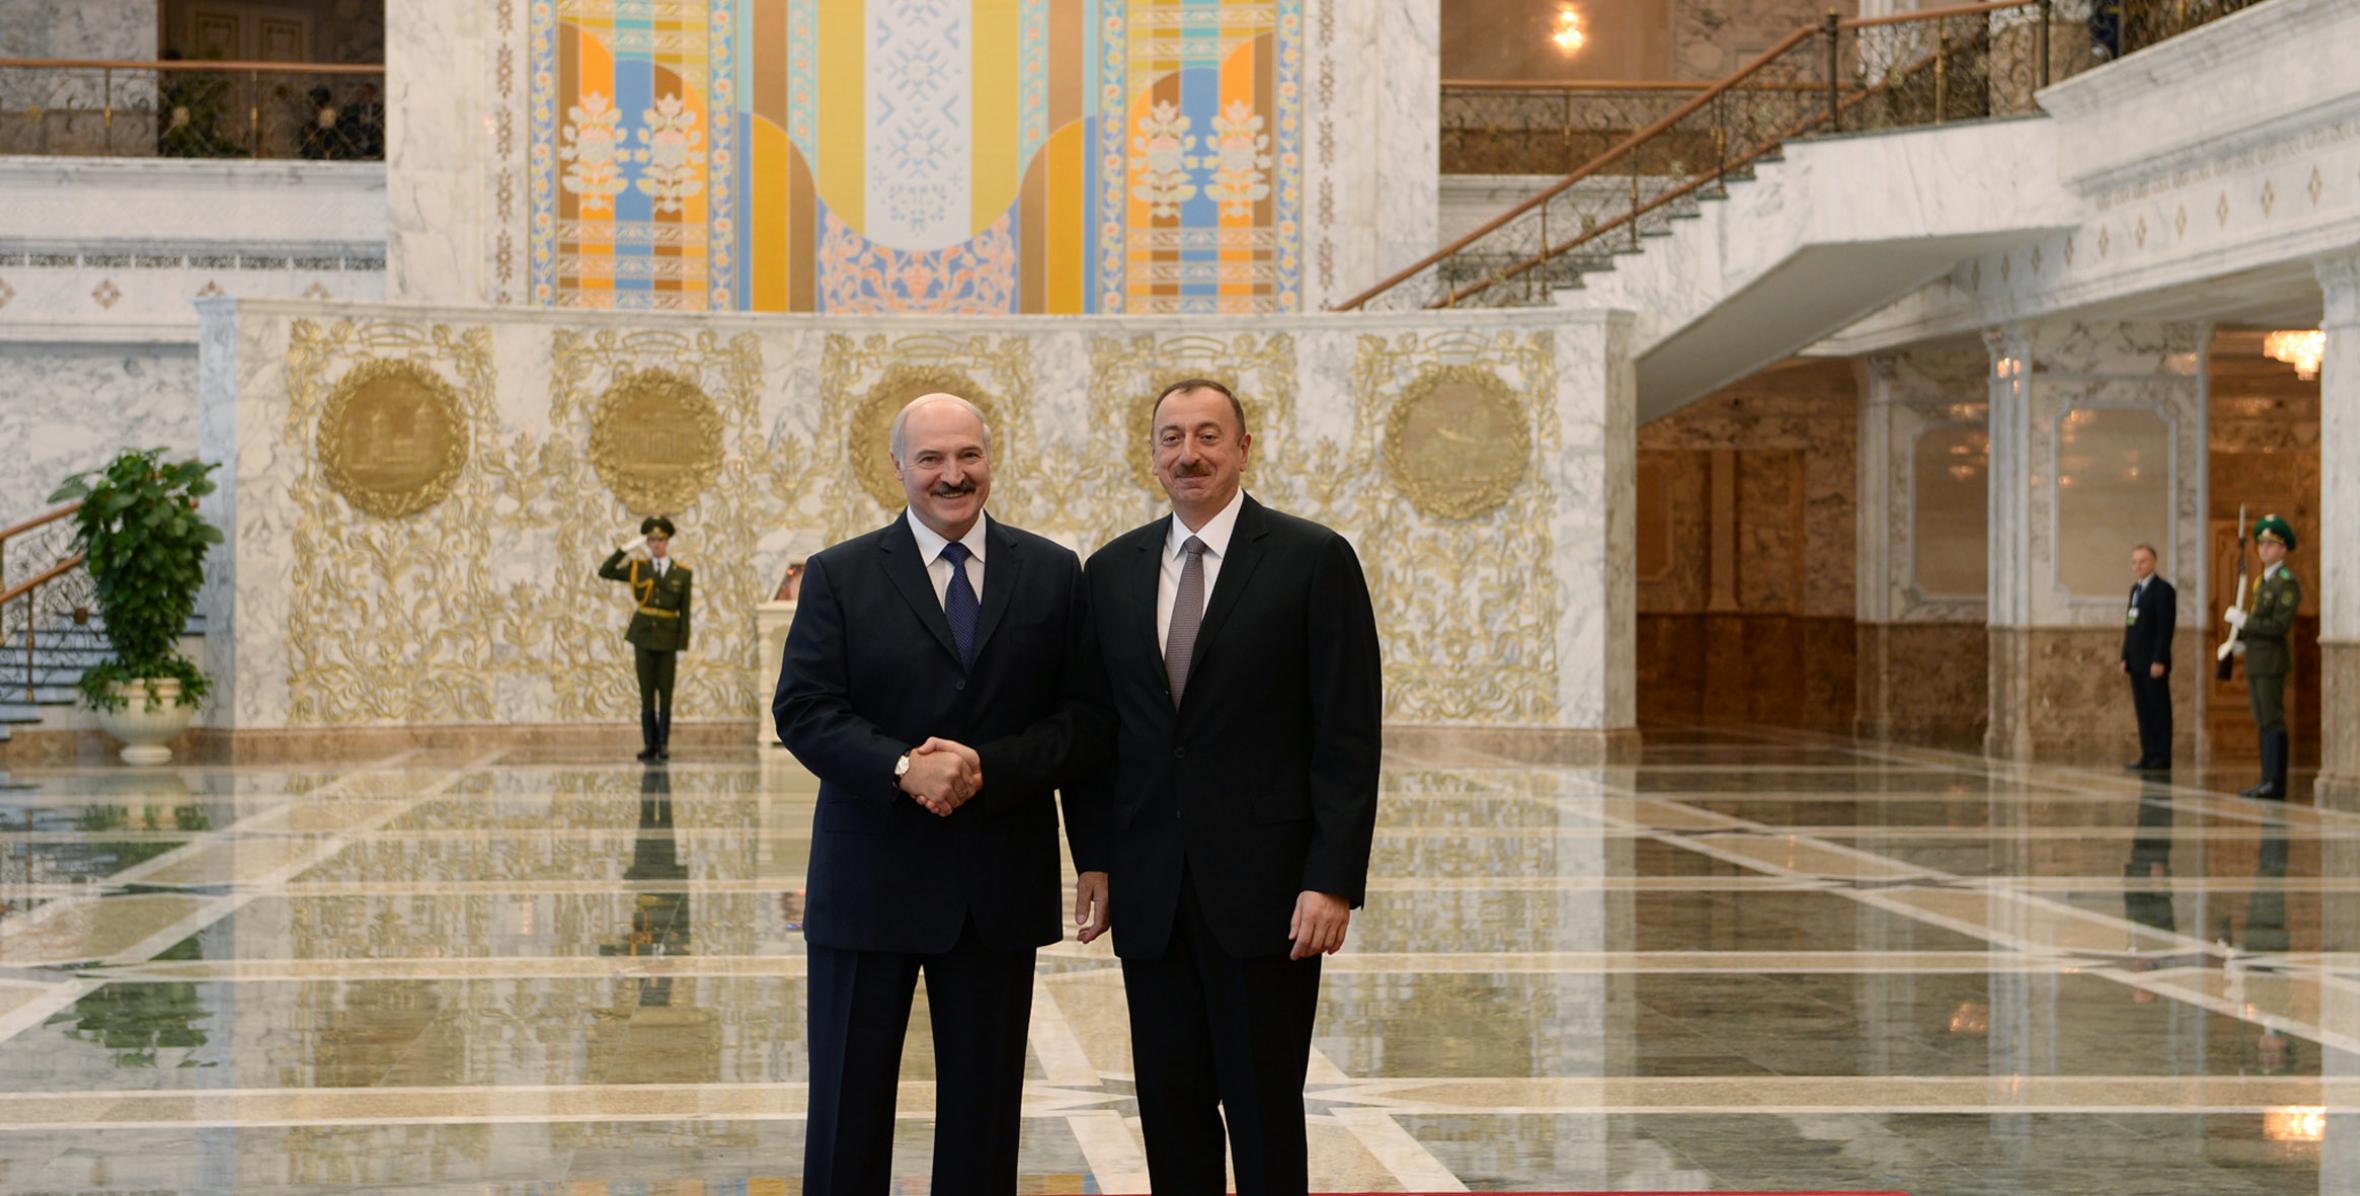 Ilham Aliyev attended the meeting of the CIS Council of Heads of State